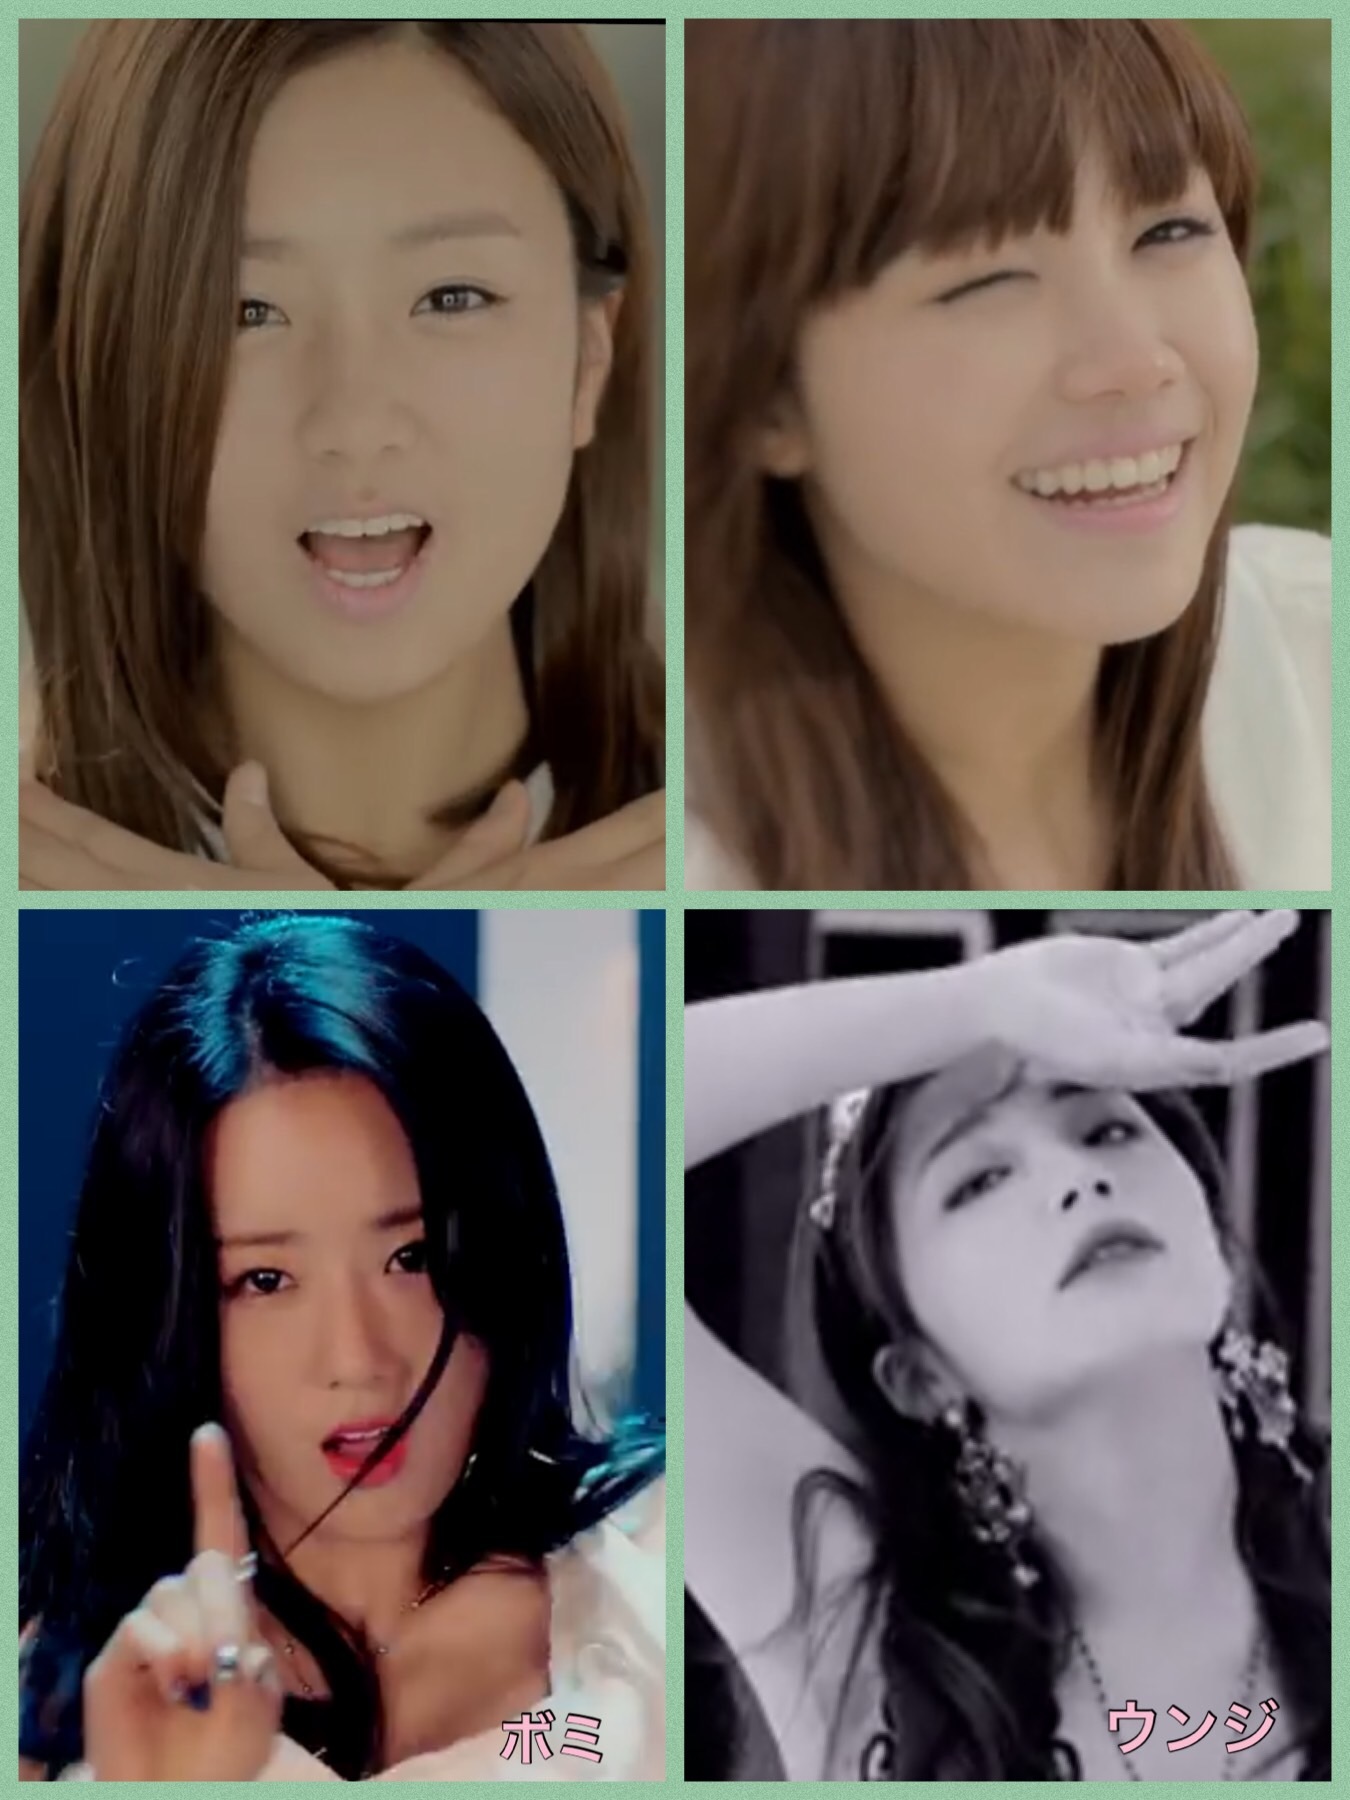 Apink (エーピンク) Aピンク 2011vs2018比較